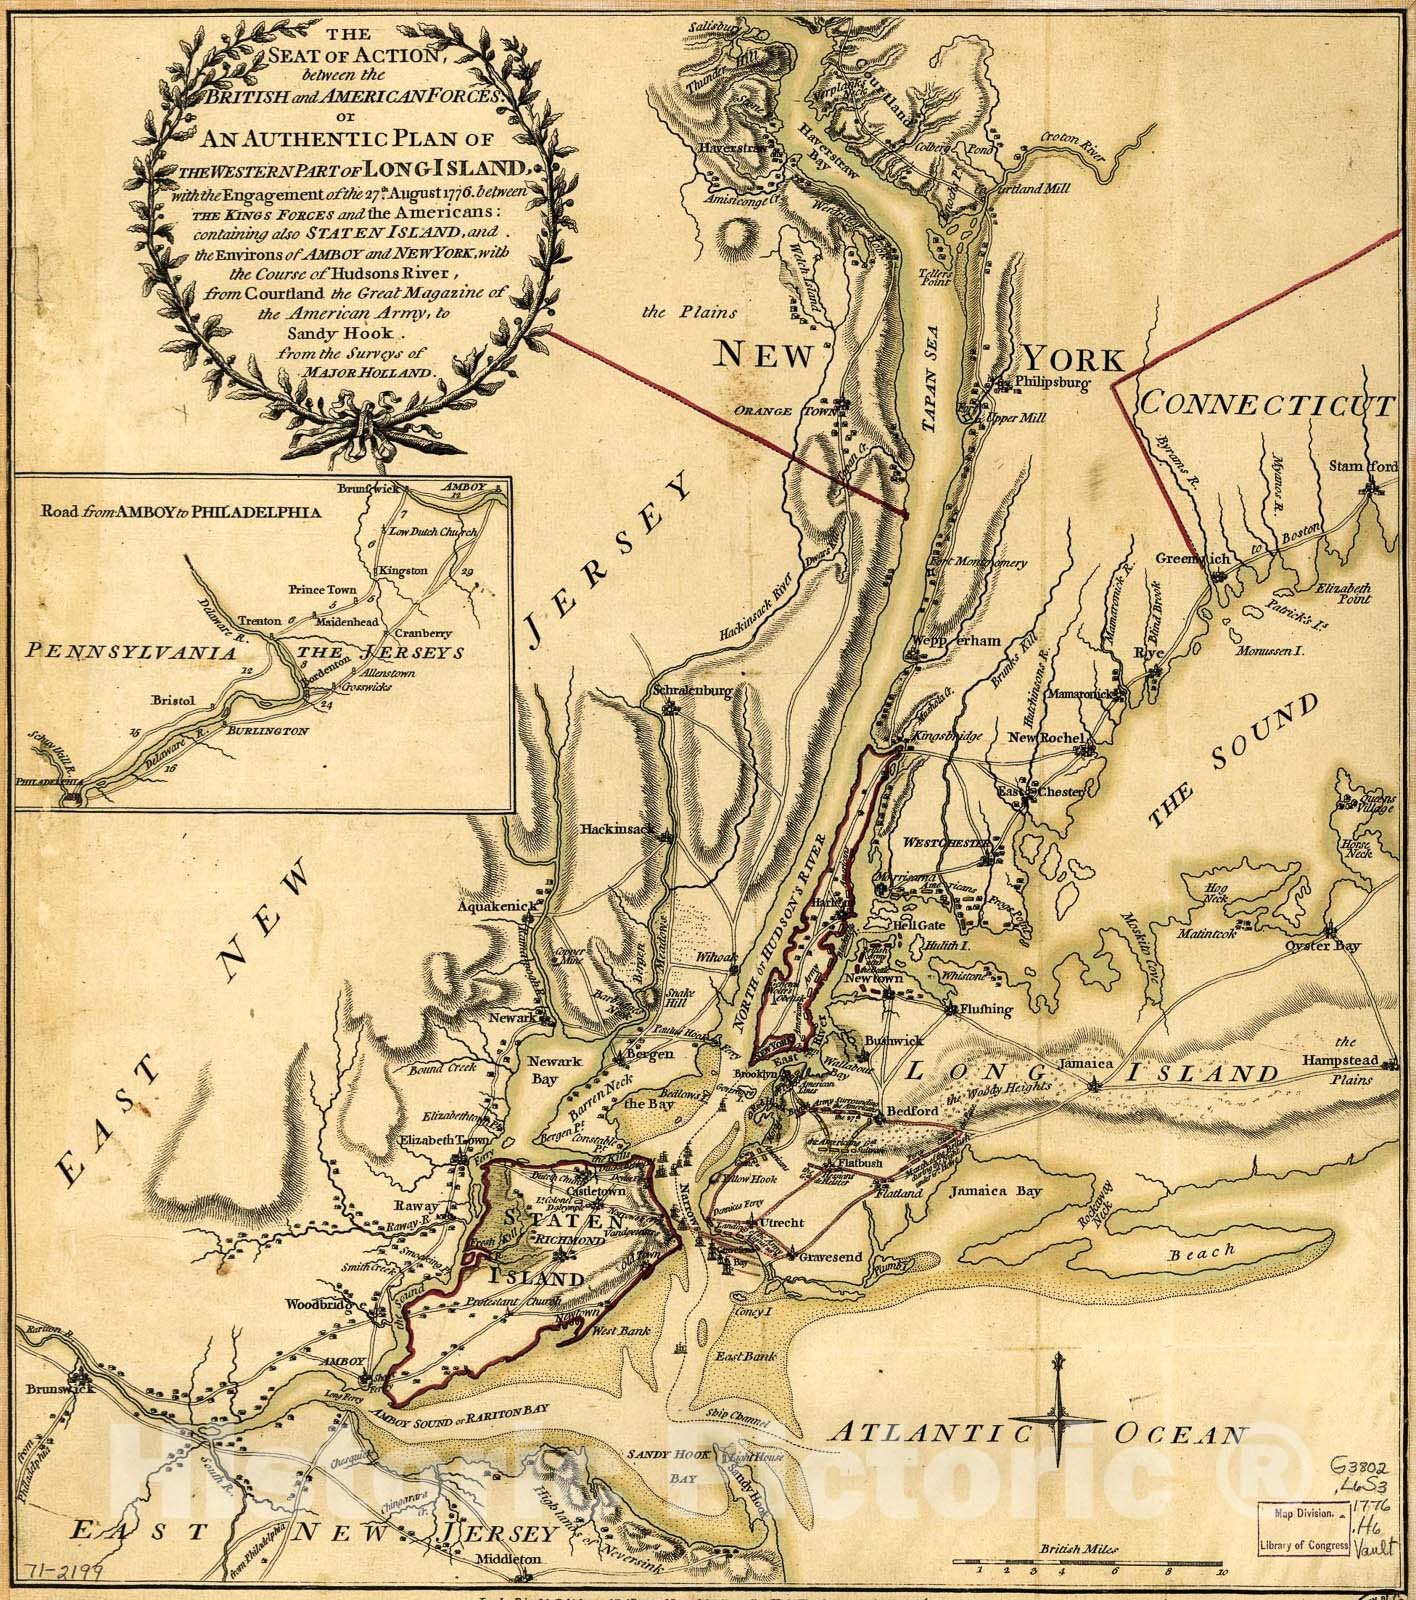 Historic 1776 Map - The seat of Action, Between The British and American Forces; or, an Authentic Plan of The Western Part of Long Island, with The Engagement of The 27th August 1776